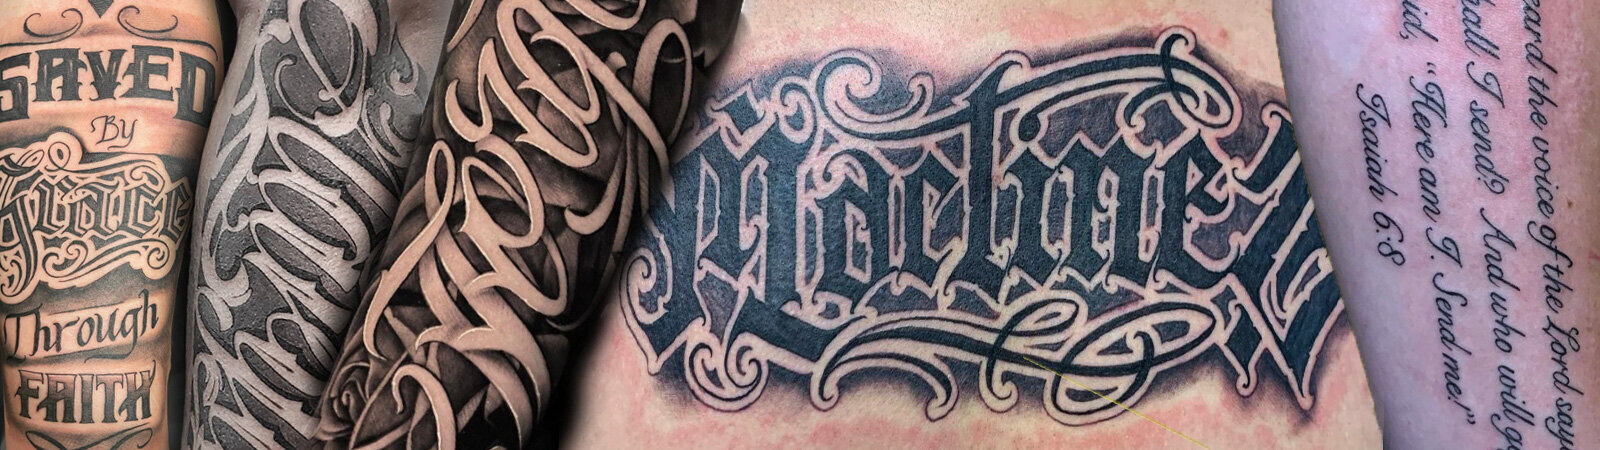 Free tattoo fonts: the best designs you can download today | Creative Bloq